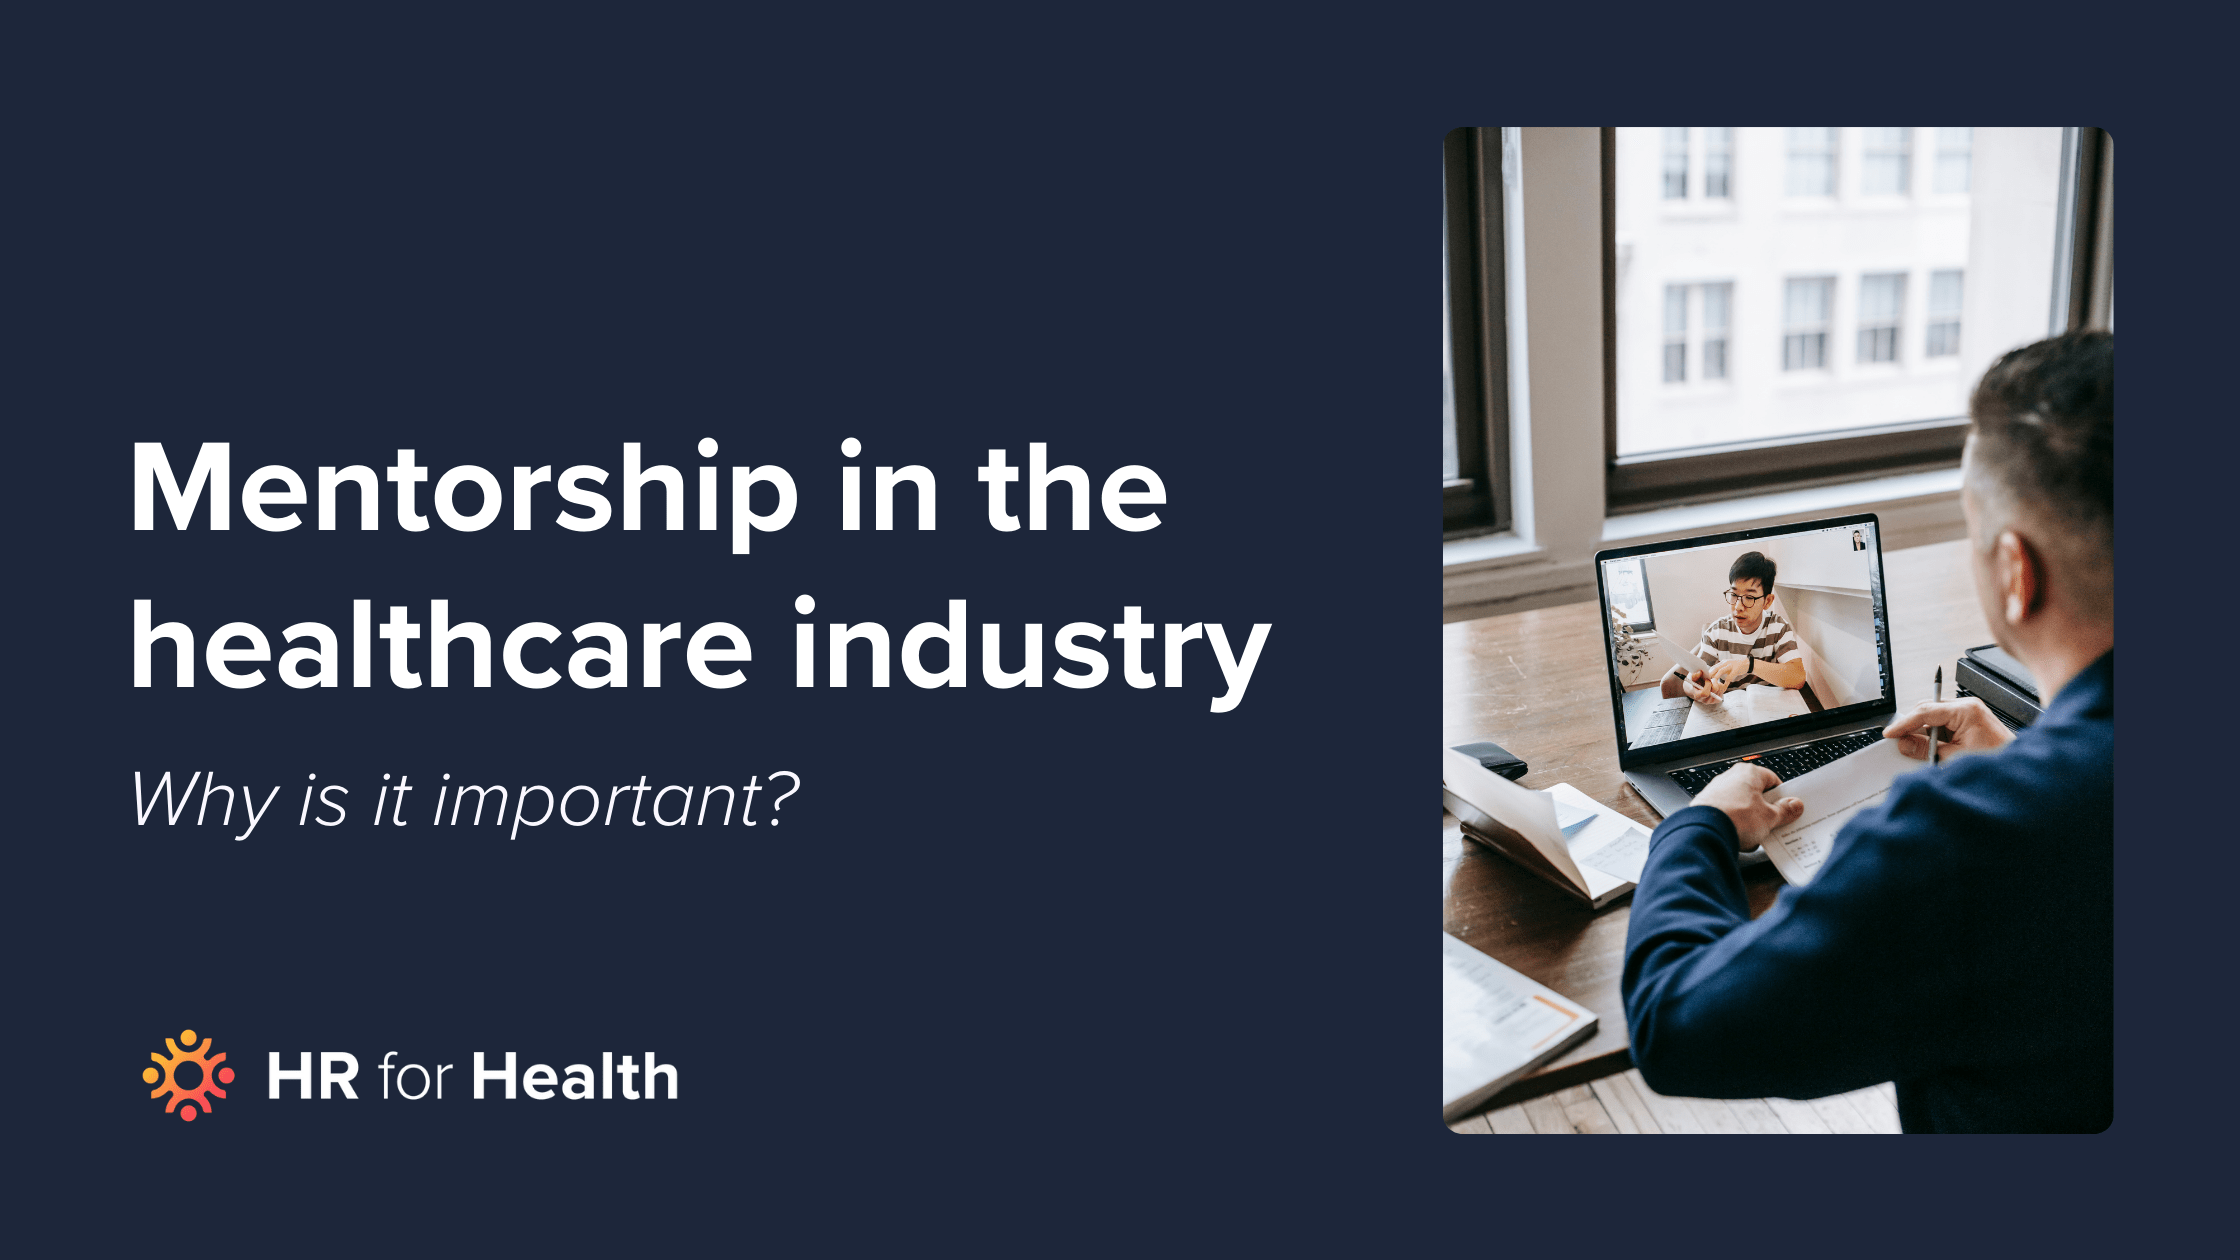 Mentorship in the healthcare industry